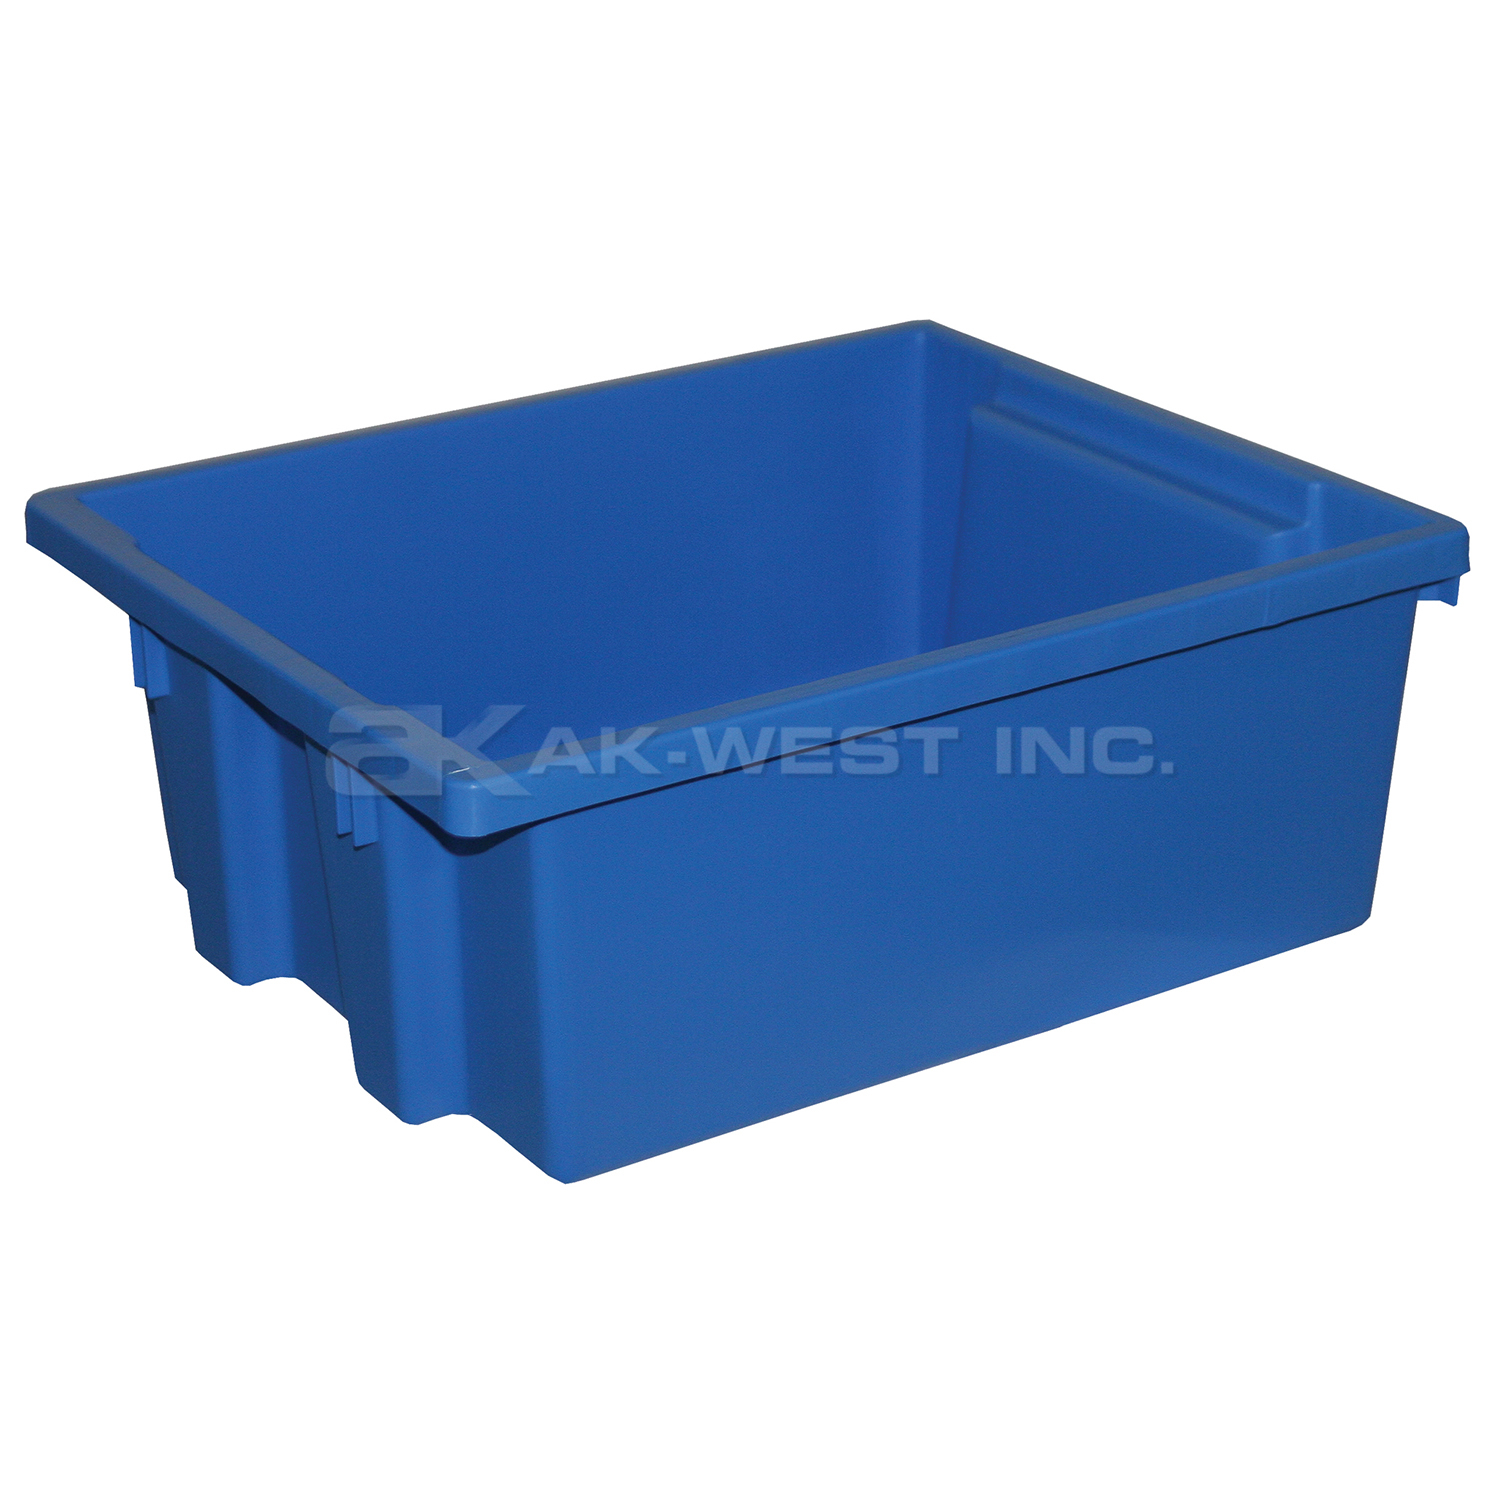 Blue, 15.25" x 12.25" x 6", Nest and Stack Tote